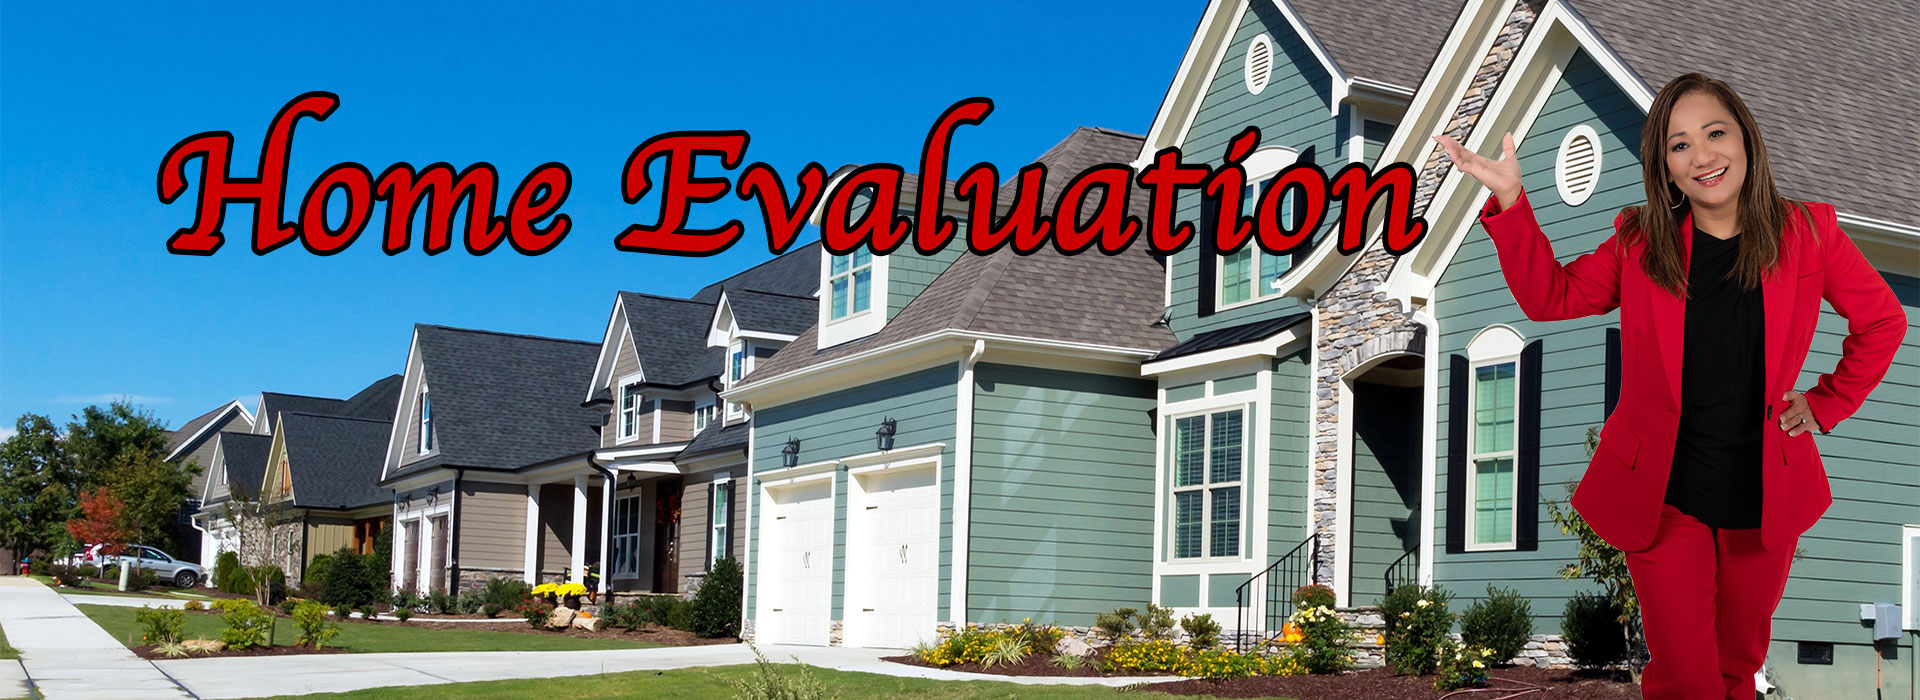 Carmelita Obradovic is an experienced Kelowna realtor ready to give you an accurate home evaluation for your Kelowna and surrounding area property.